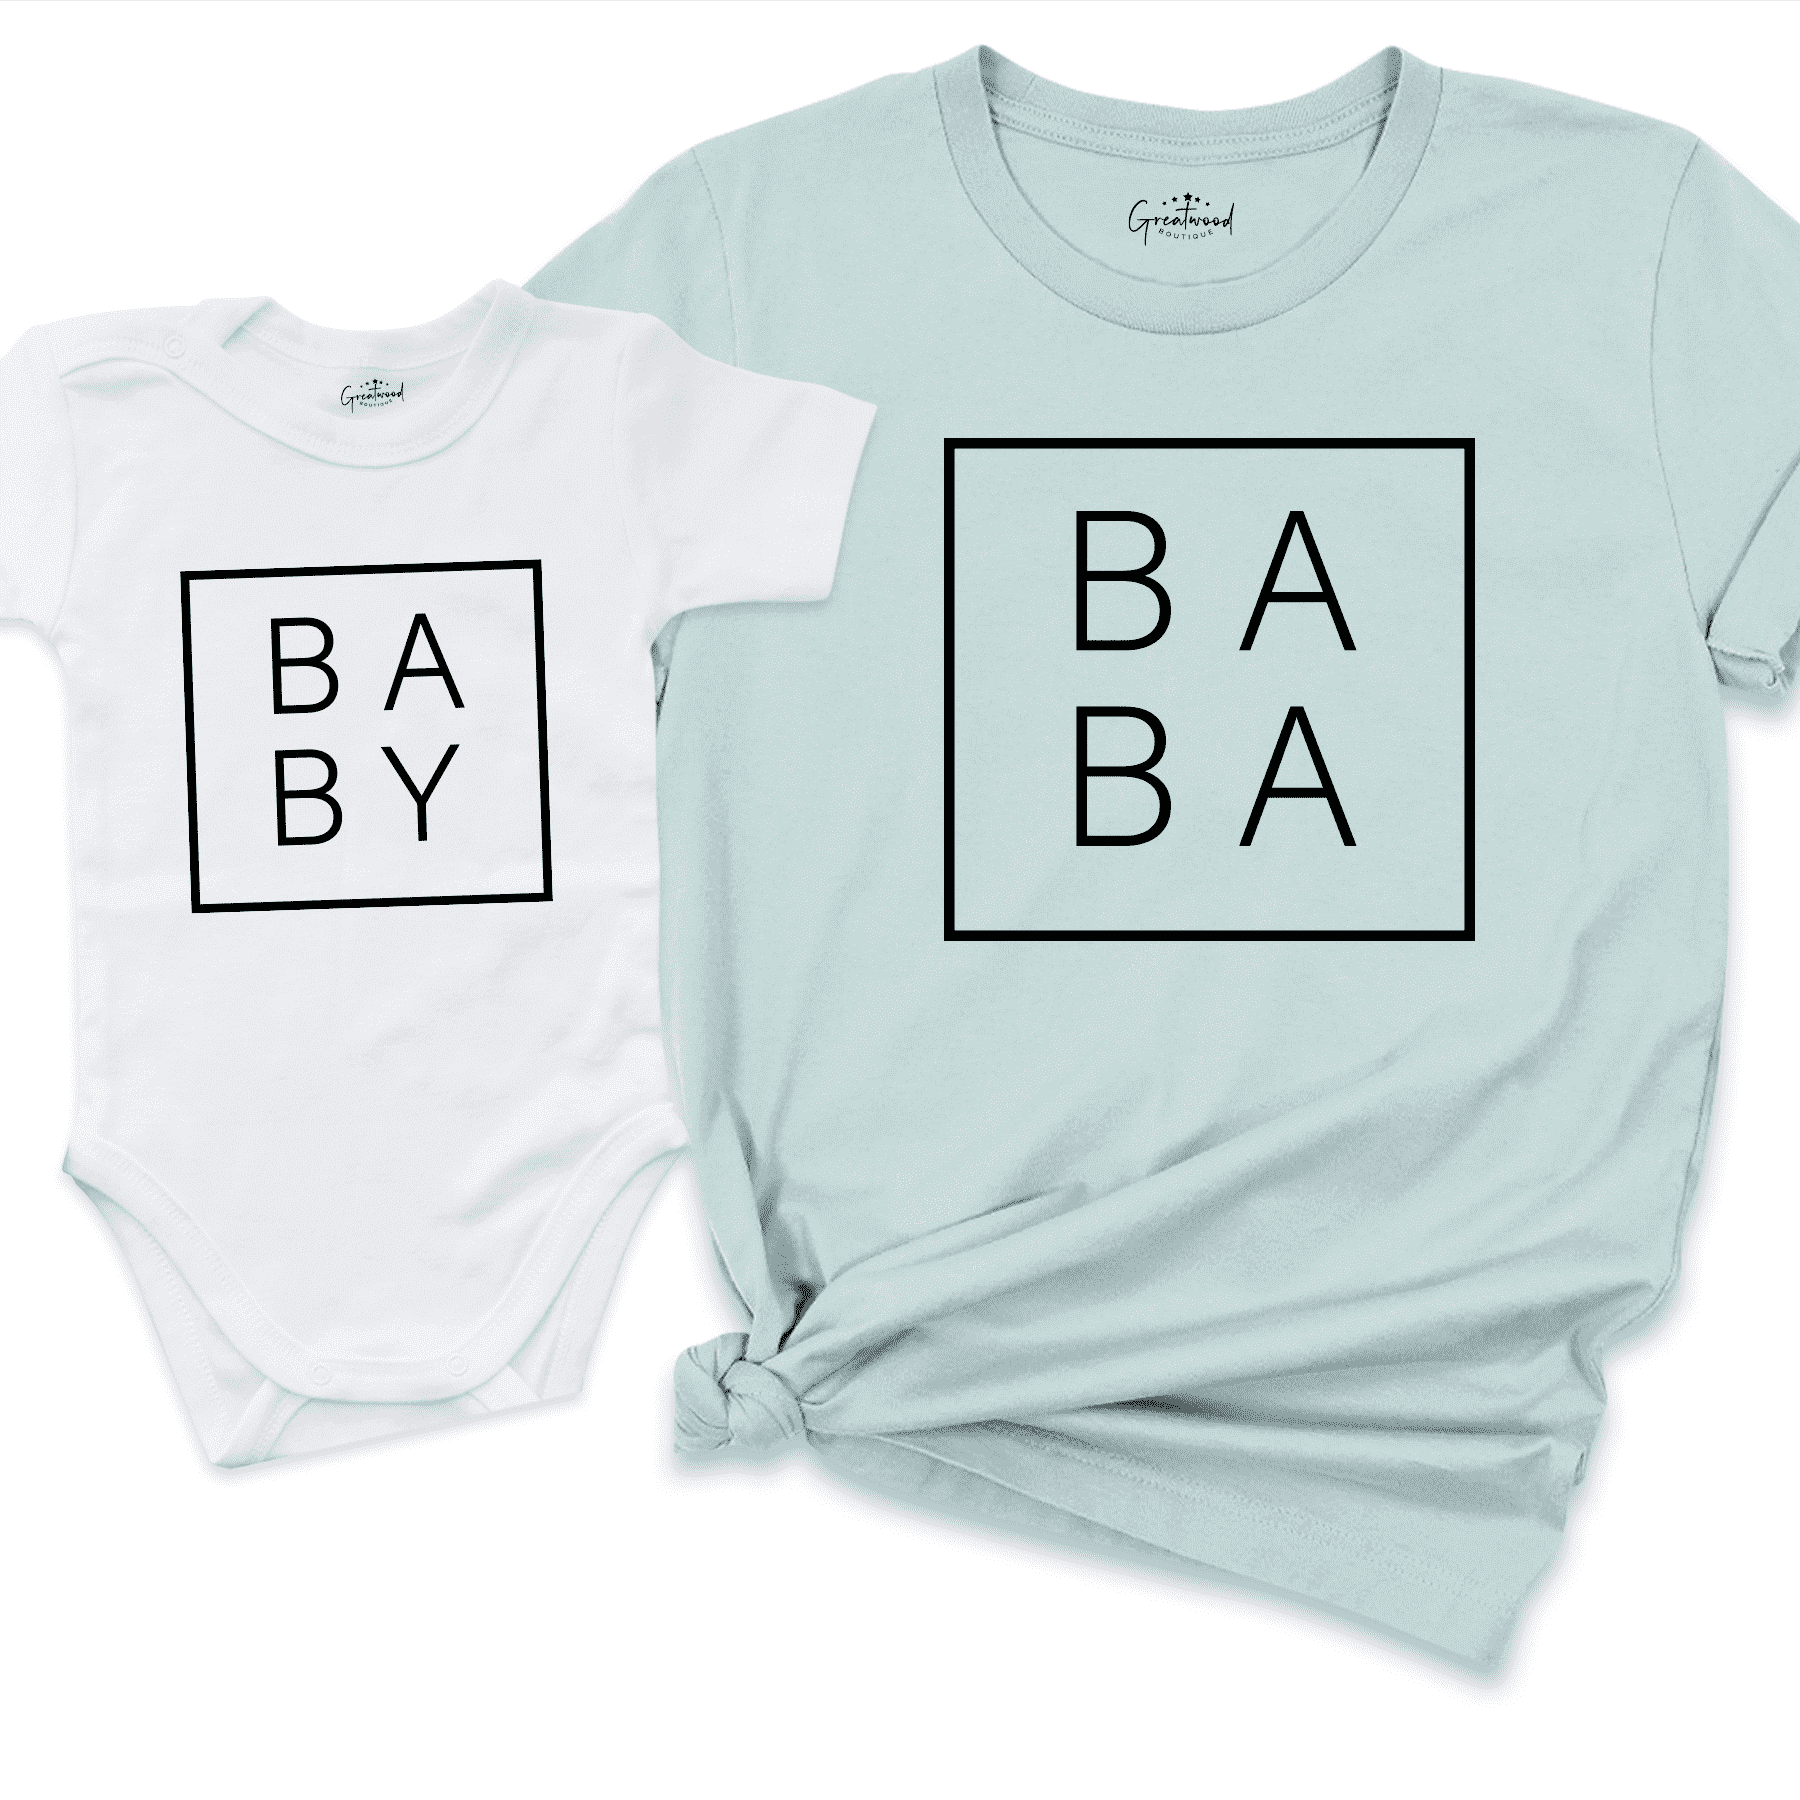 Baba and Baby Shirt Blue - Greatwood Boutique